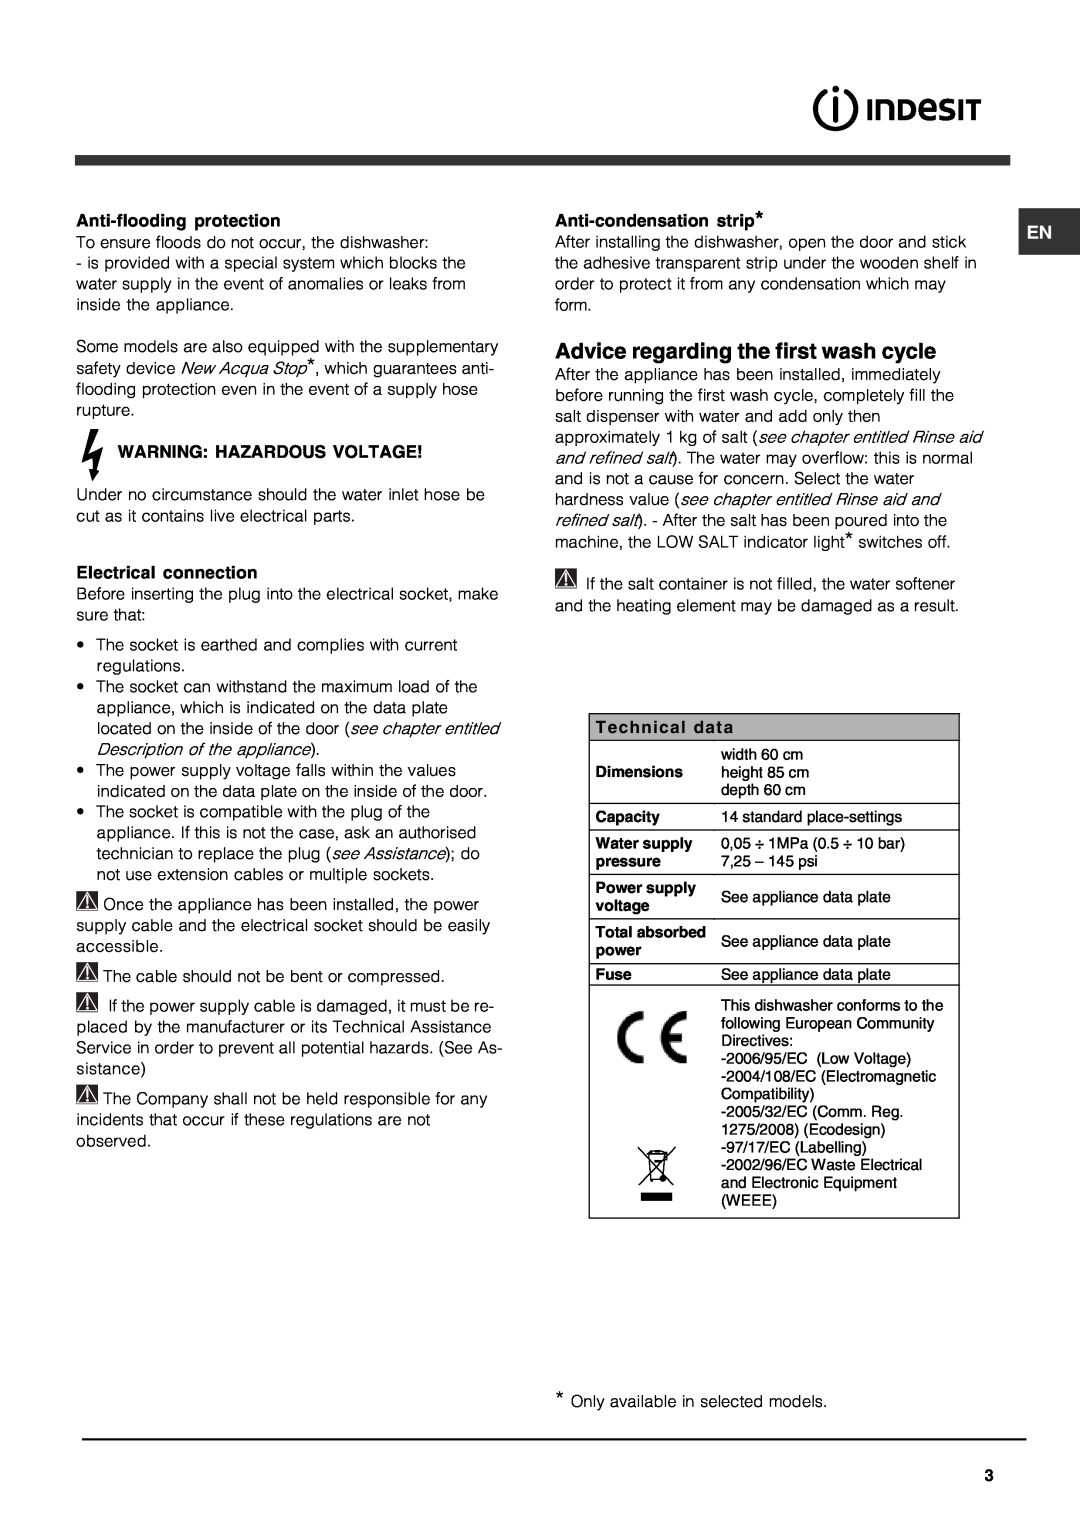 Indesit IDP-148 operating instructions Advice regarding the first wash cycle, Technical data 